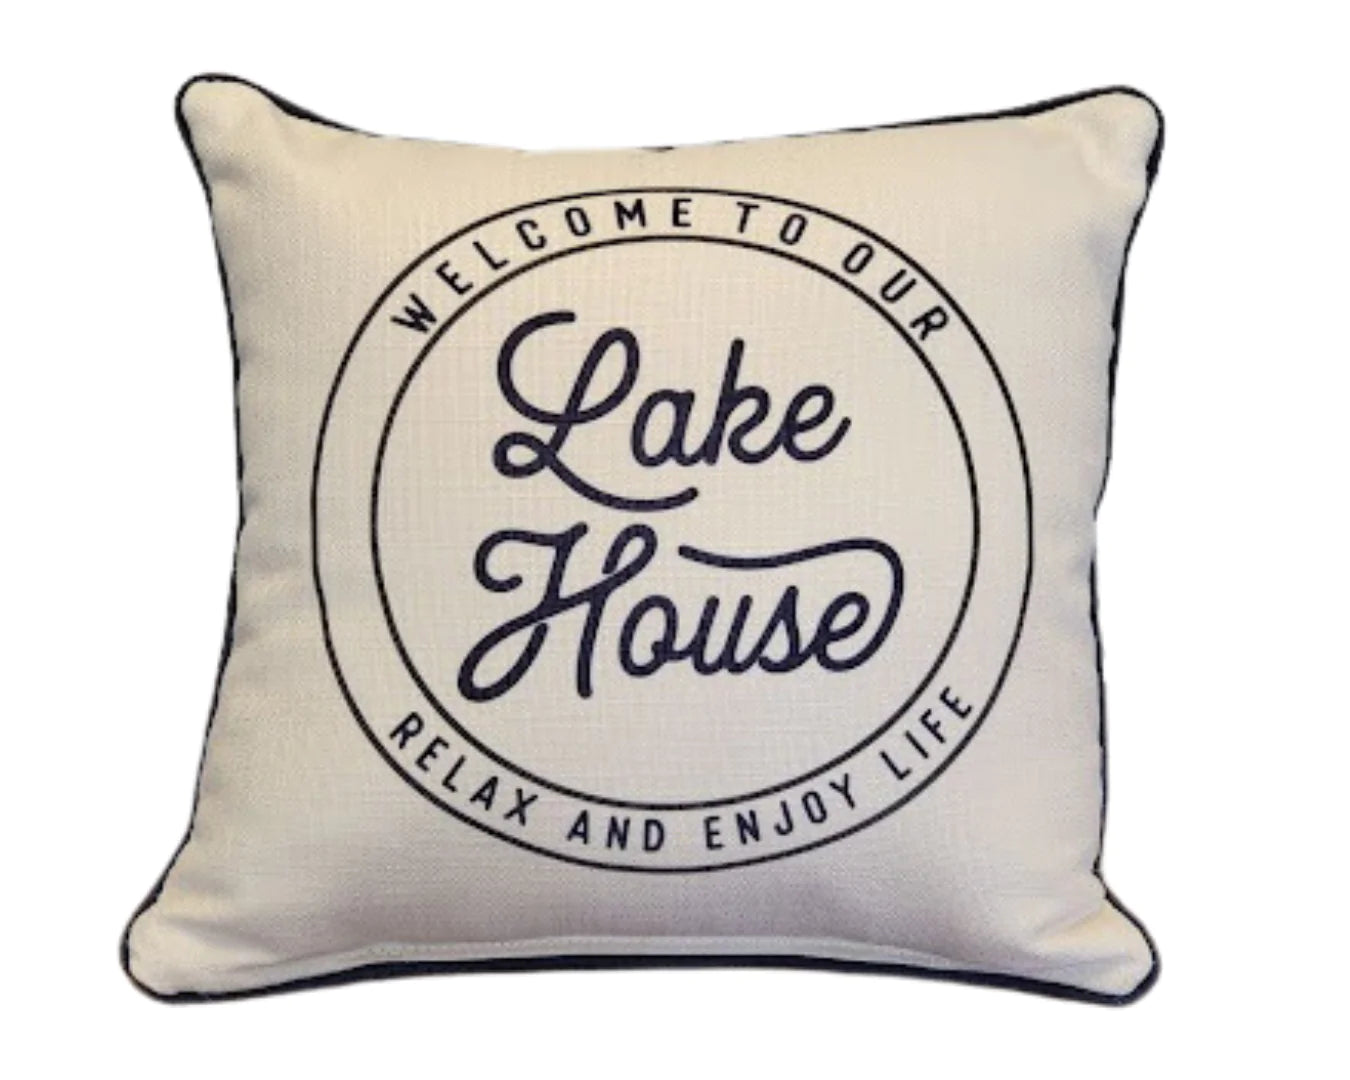 Welcome to our Lake House Double Sided Corded Pillow